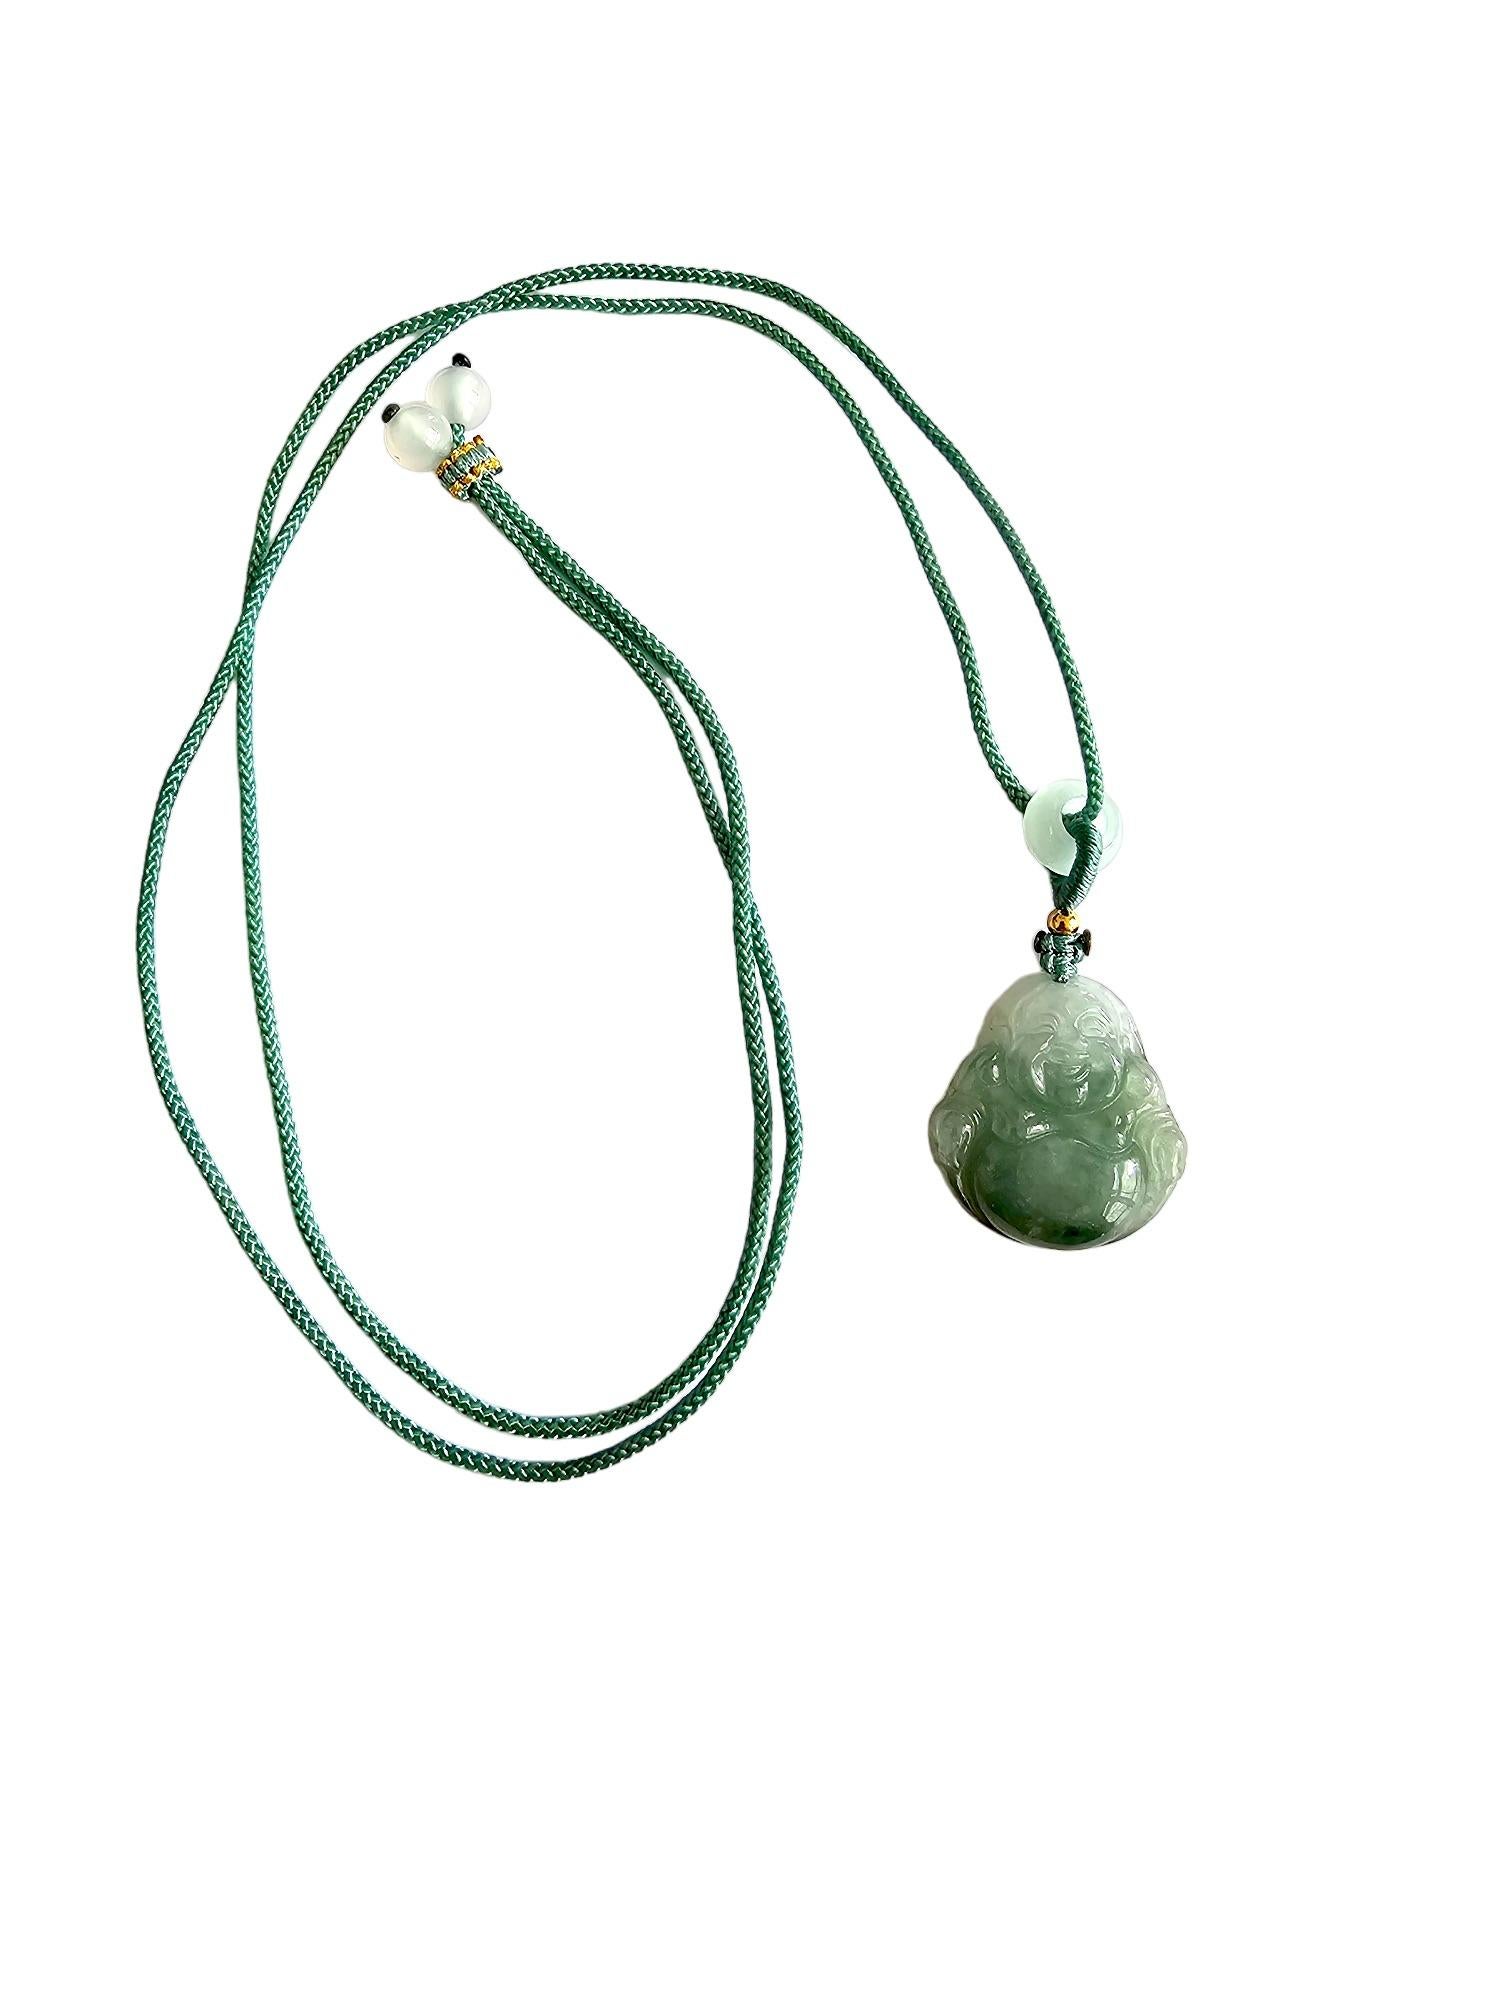 Sapporo Burmese A-Jadeite Laughing Buddha Pendant Necklace with FYORO String For Sale 3